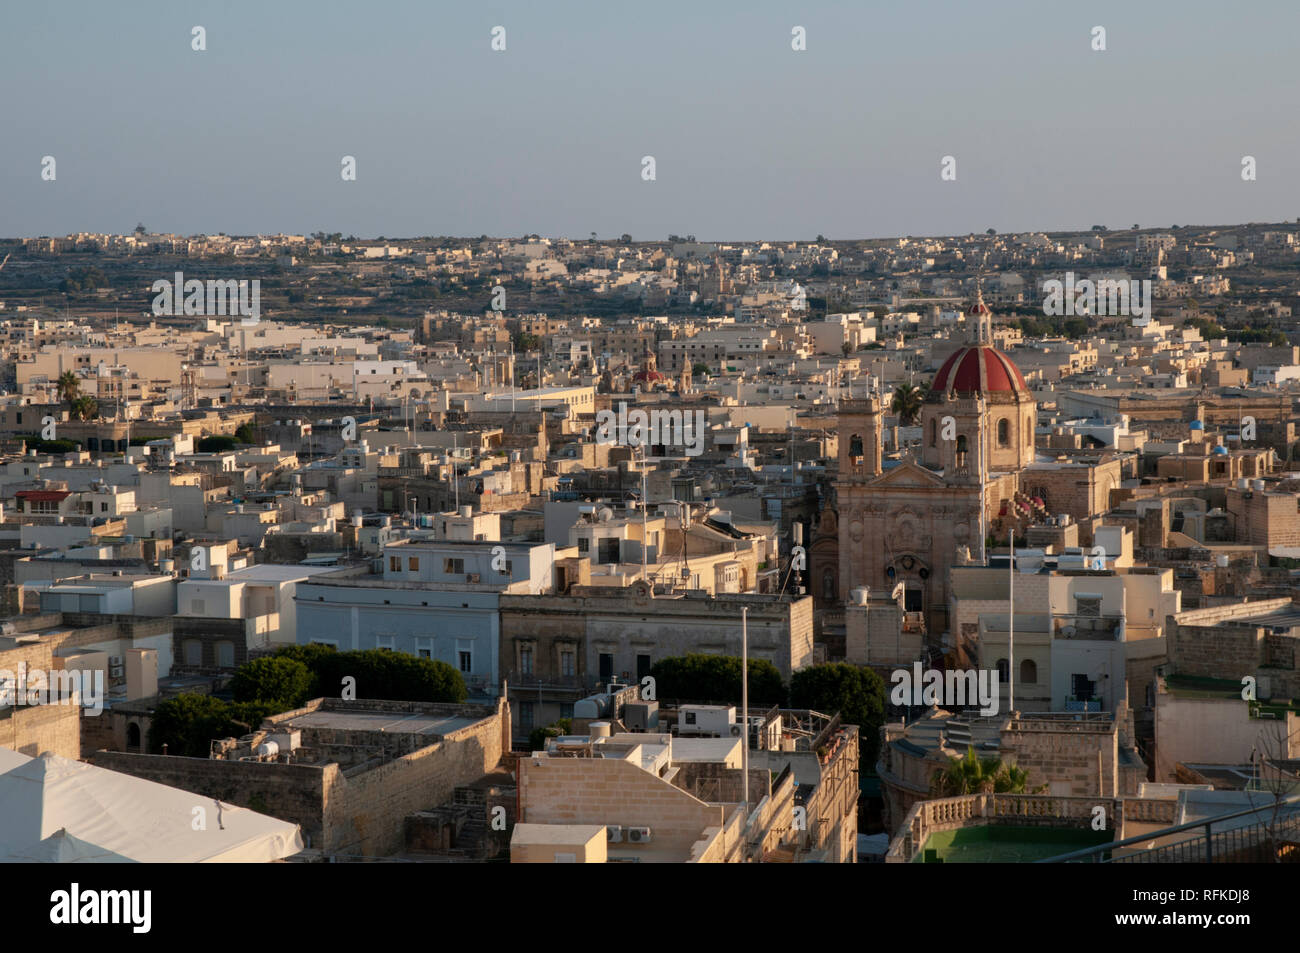 View from the Citadella of rooftops of Victoria, the capital on the island of Gozo in Malta. St George's Basilica is a prominent landmark. Stock Photo